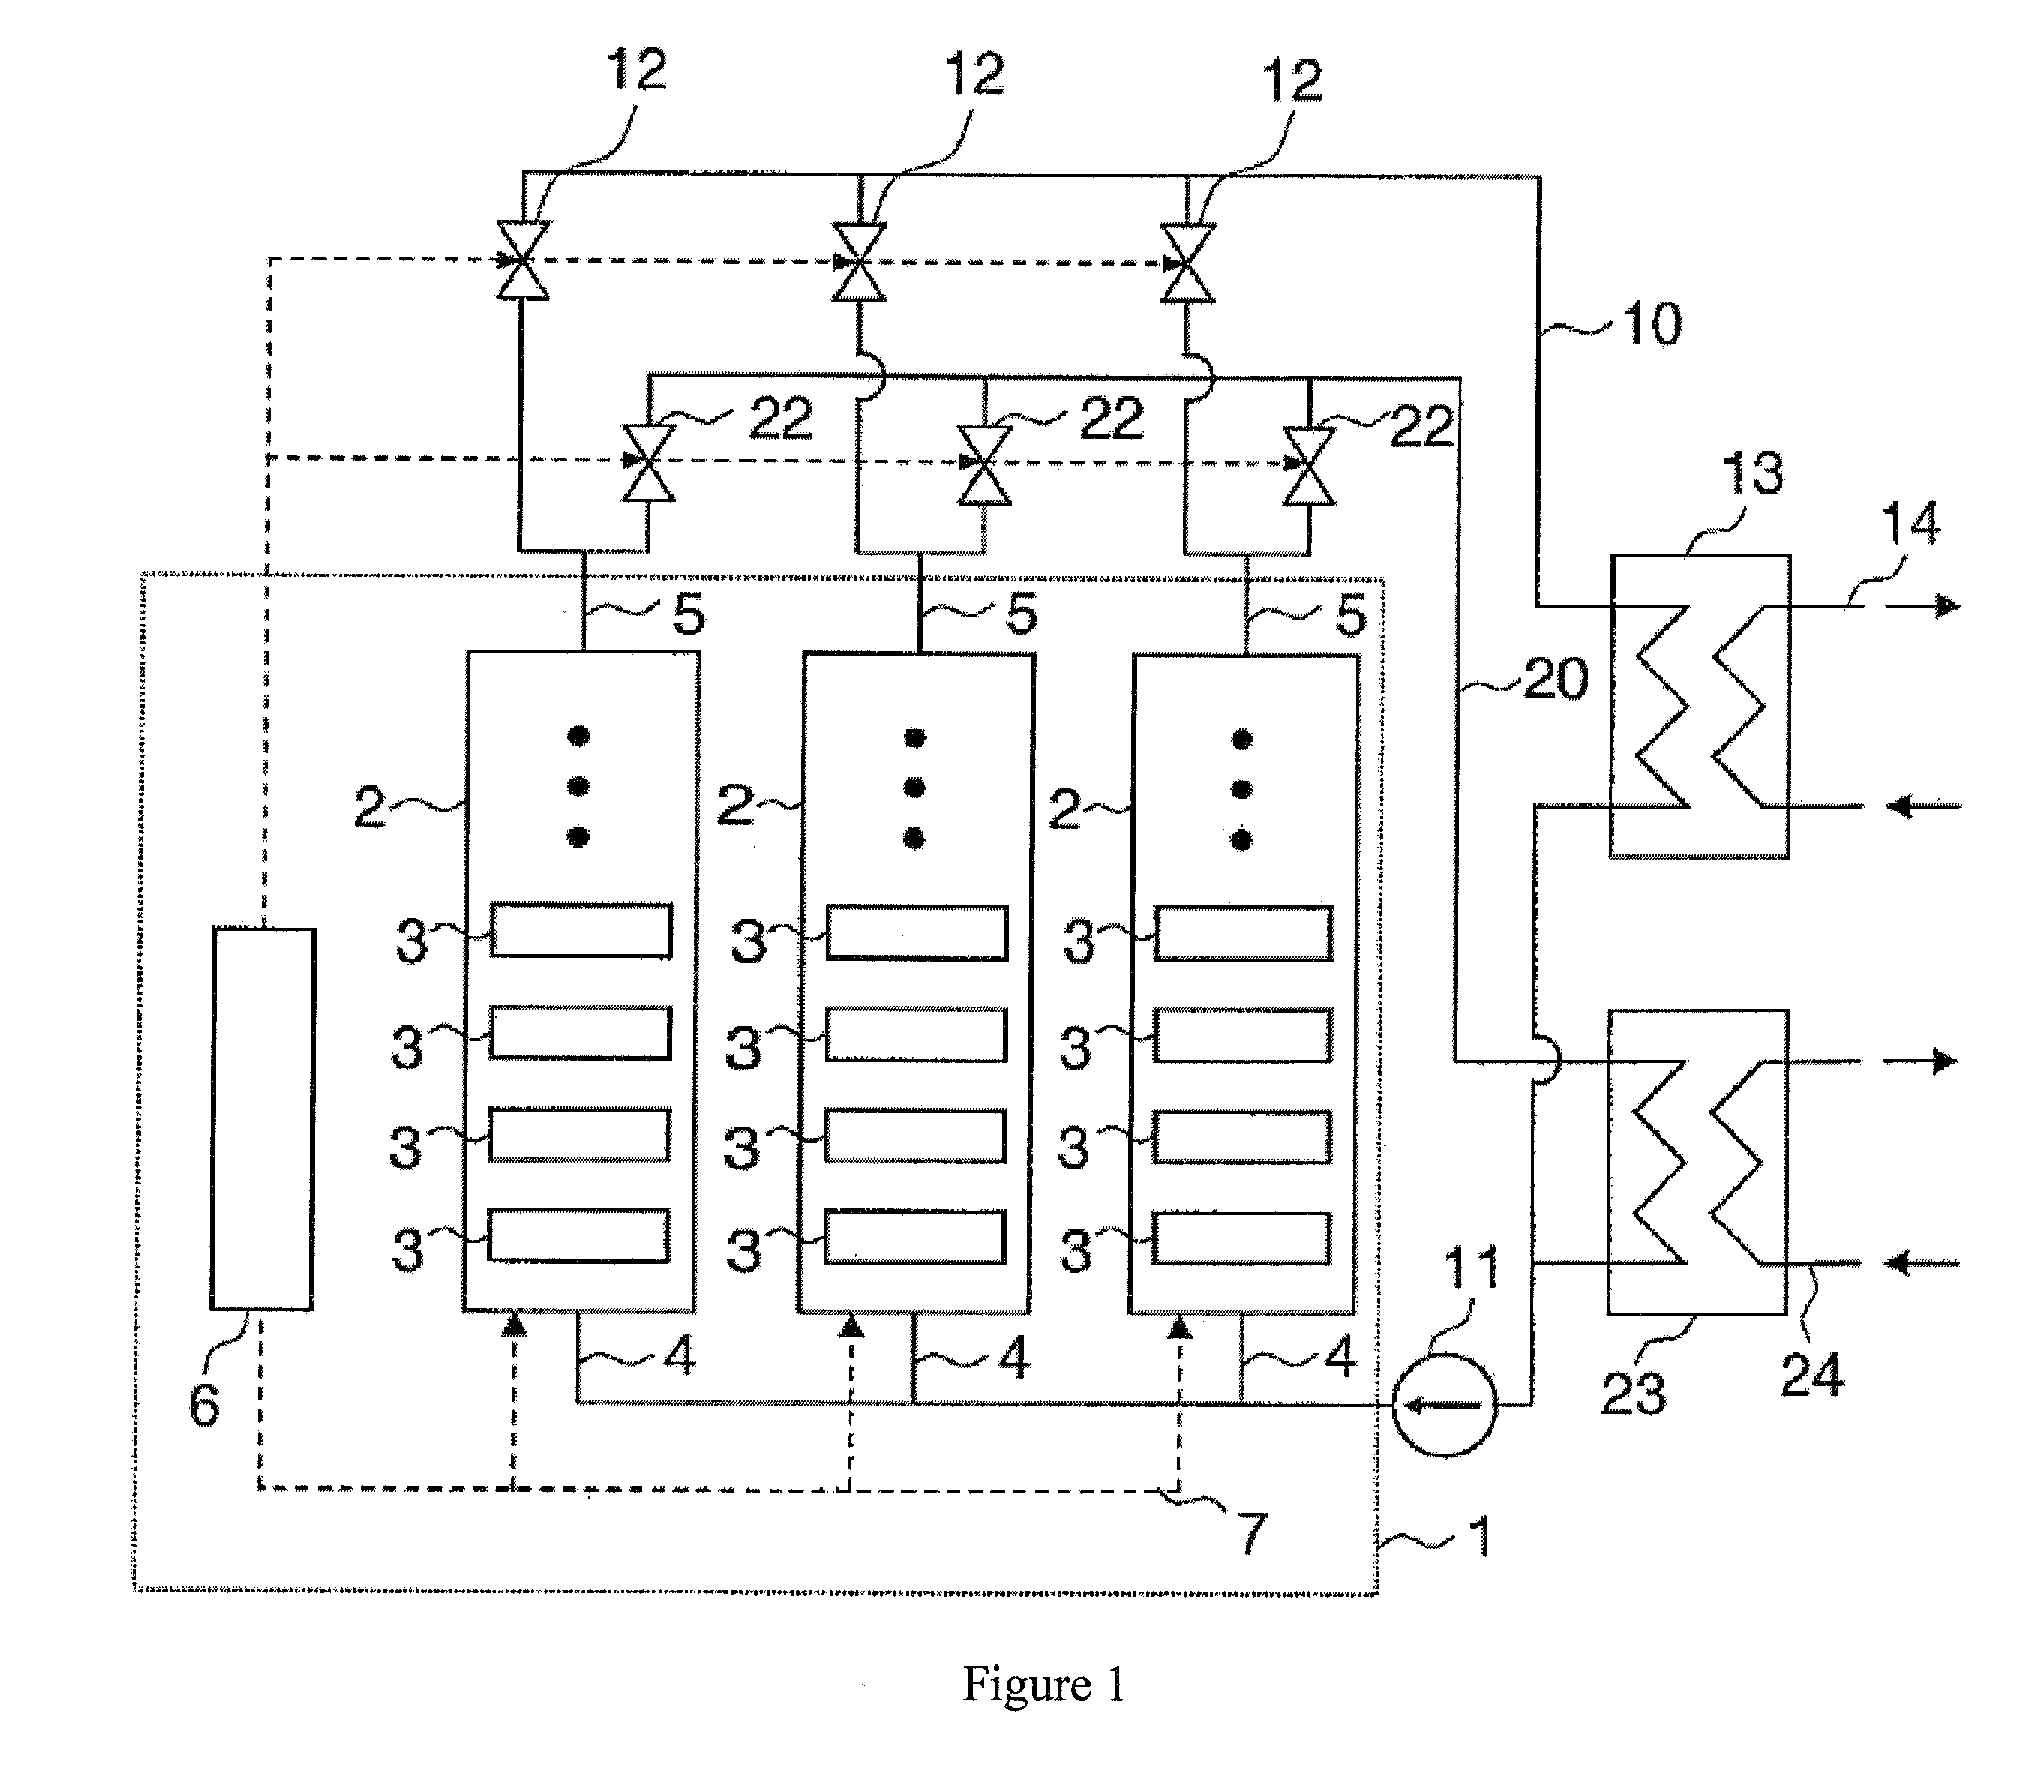 Method and system for using the waste heat of a computer system